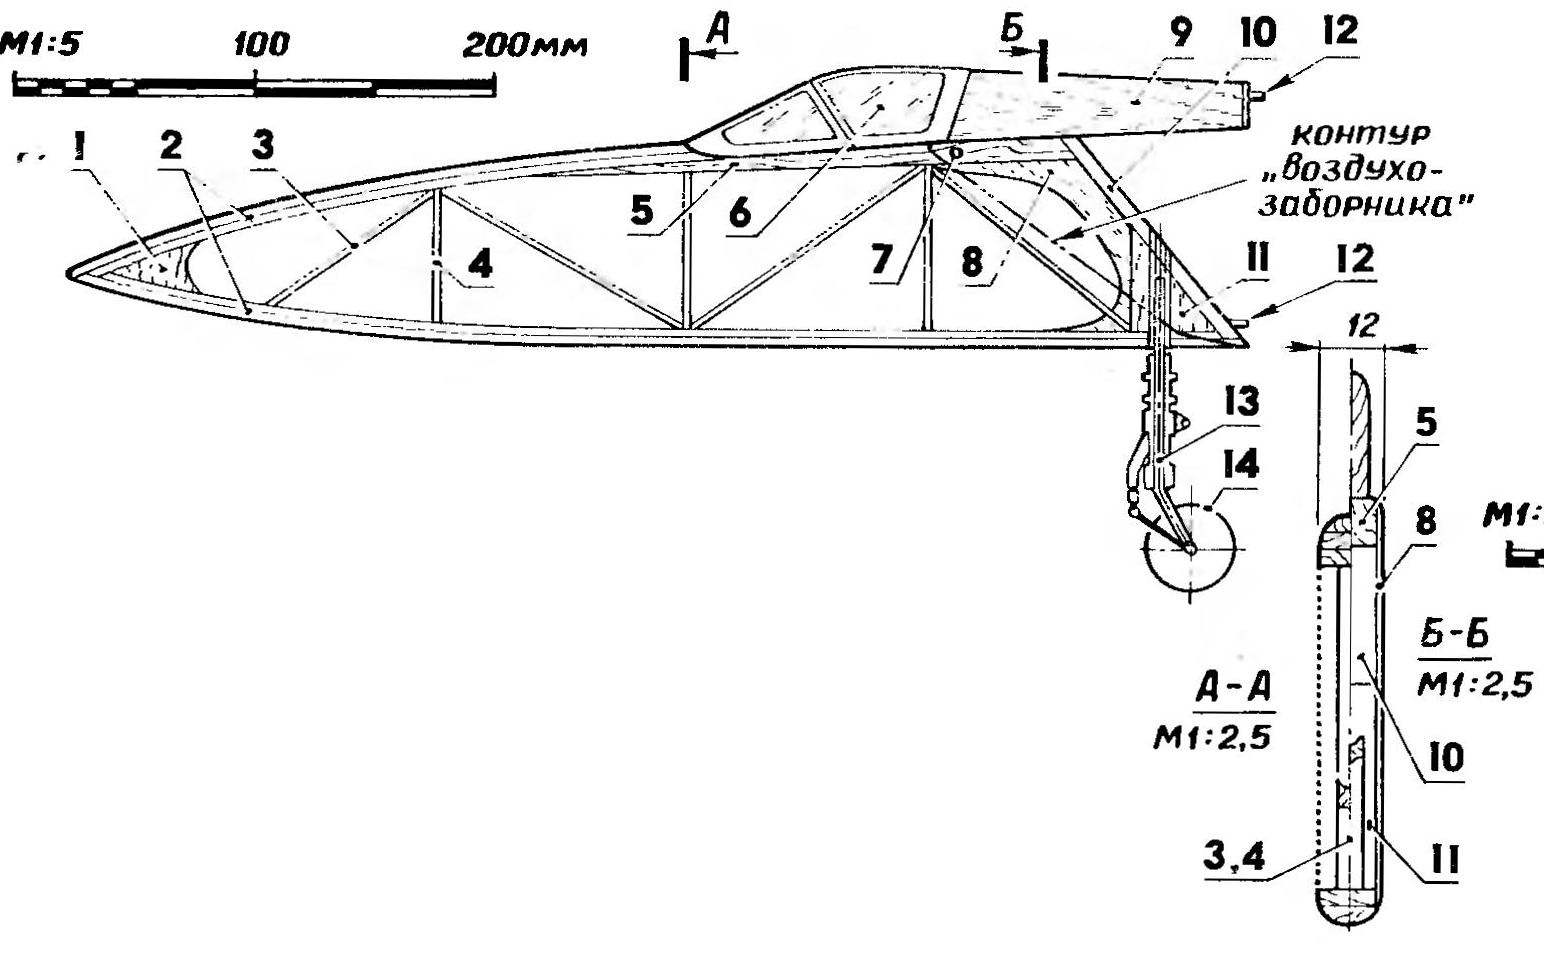 Fig. 3. The nose of the fuselage: